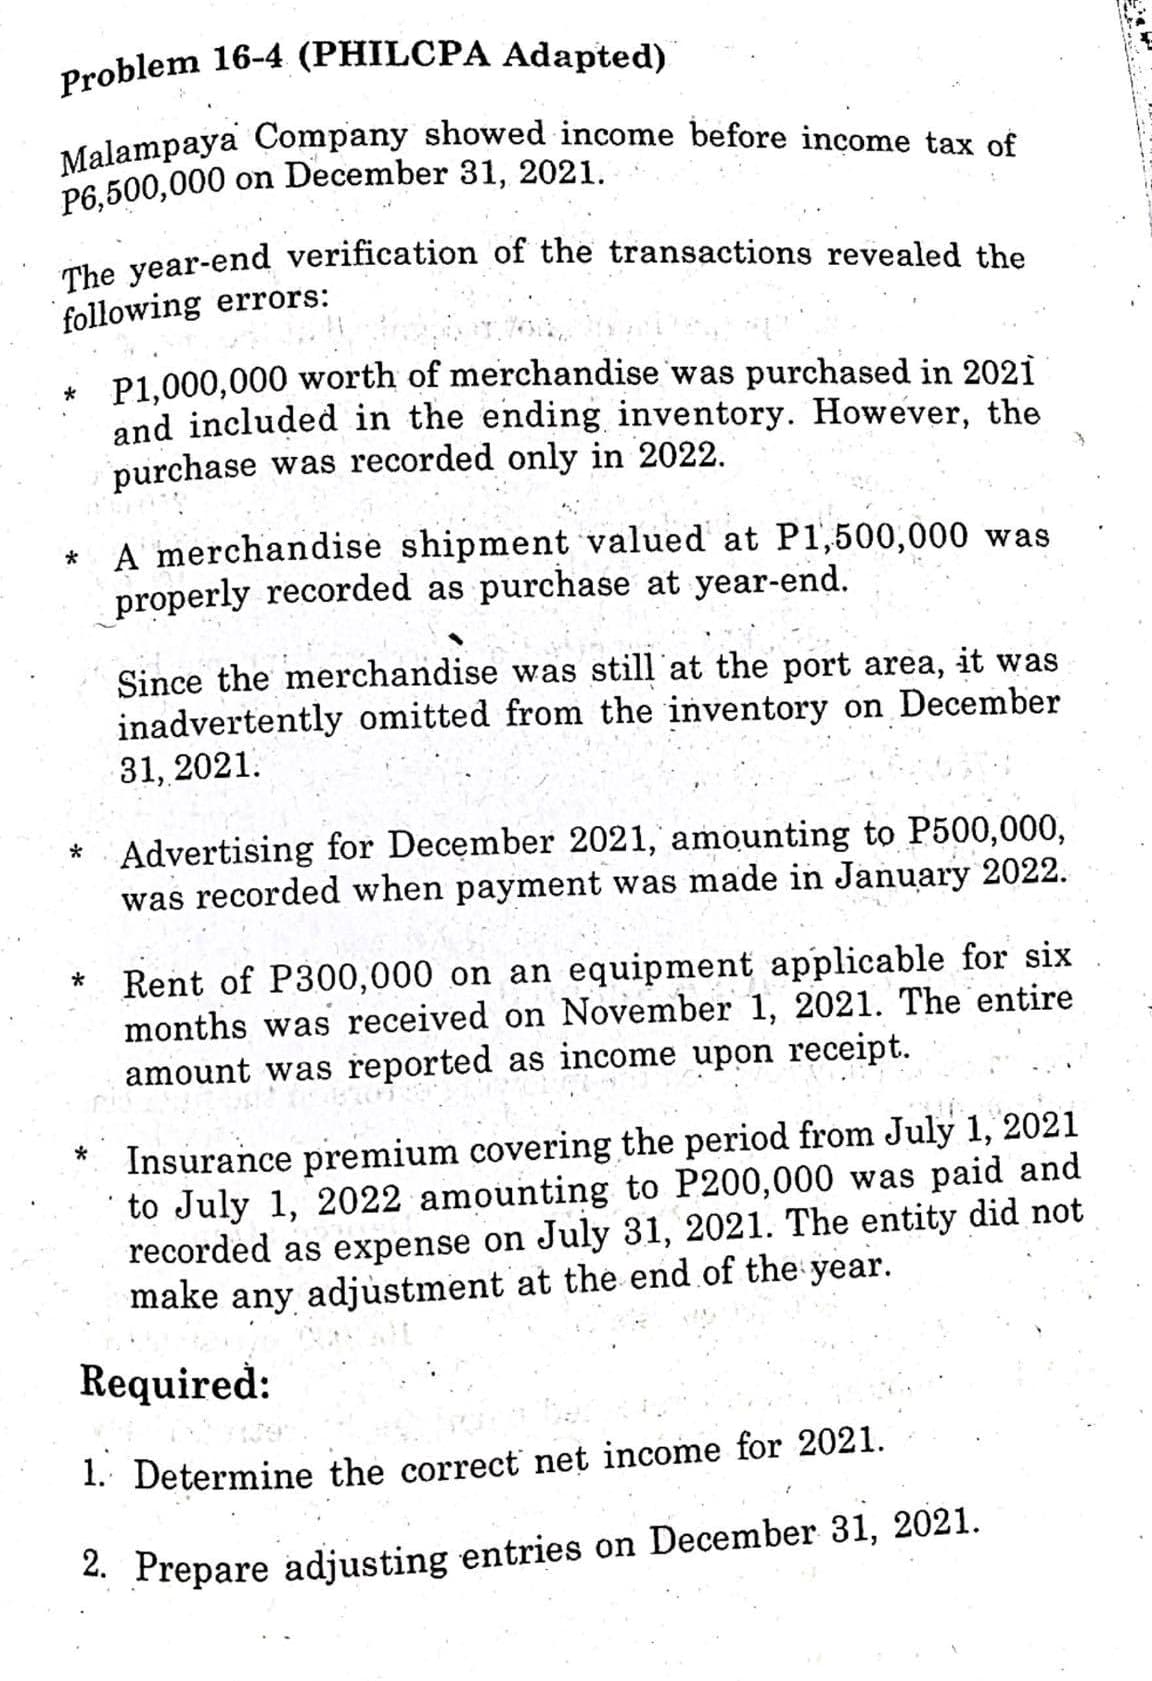 Problem 16-4 (PHILCPA Adapted)
Malampaya Company showed income before income tax of
P6,500,000 on December 31, 2021.
The year-end verification of the transactions revealed the
following errors:
* P1,000,000 worth of merchandise was purchased in 2021
and included in the ending inventory. However, the
purchase was recorded only in 2022.
A merchandise shipment valued at P1,500,000 was
properly recorded as purchase at year-end.
Since the merchandise was still at the port area, it was
inadvertently omitted from the inventory on December
31, 2021.
*Advertising for December 2021, amounting to P500,000,
was recorded when payment was made in January 2022.
*
Rent of P300,000 on an equipment applicable for six
months was received on November 1, 2021. The entire
amount was reported as income upon receipt.
Insurance premium covering the period from July 1, 2021
to July 1, 2022 amounting to P200,000 was paid and
recorded as expense on July 31, 2021. The entity did not
make any adjustment at the end of the year.
Required:
1. Determine the correct net income for 2021.
2. Prepare adjusting entries on December 31, 2021.